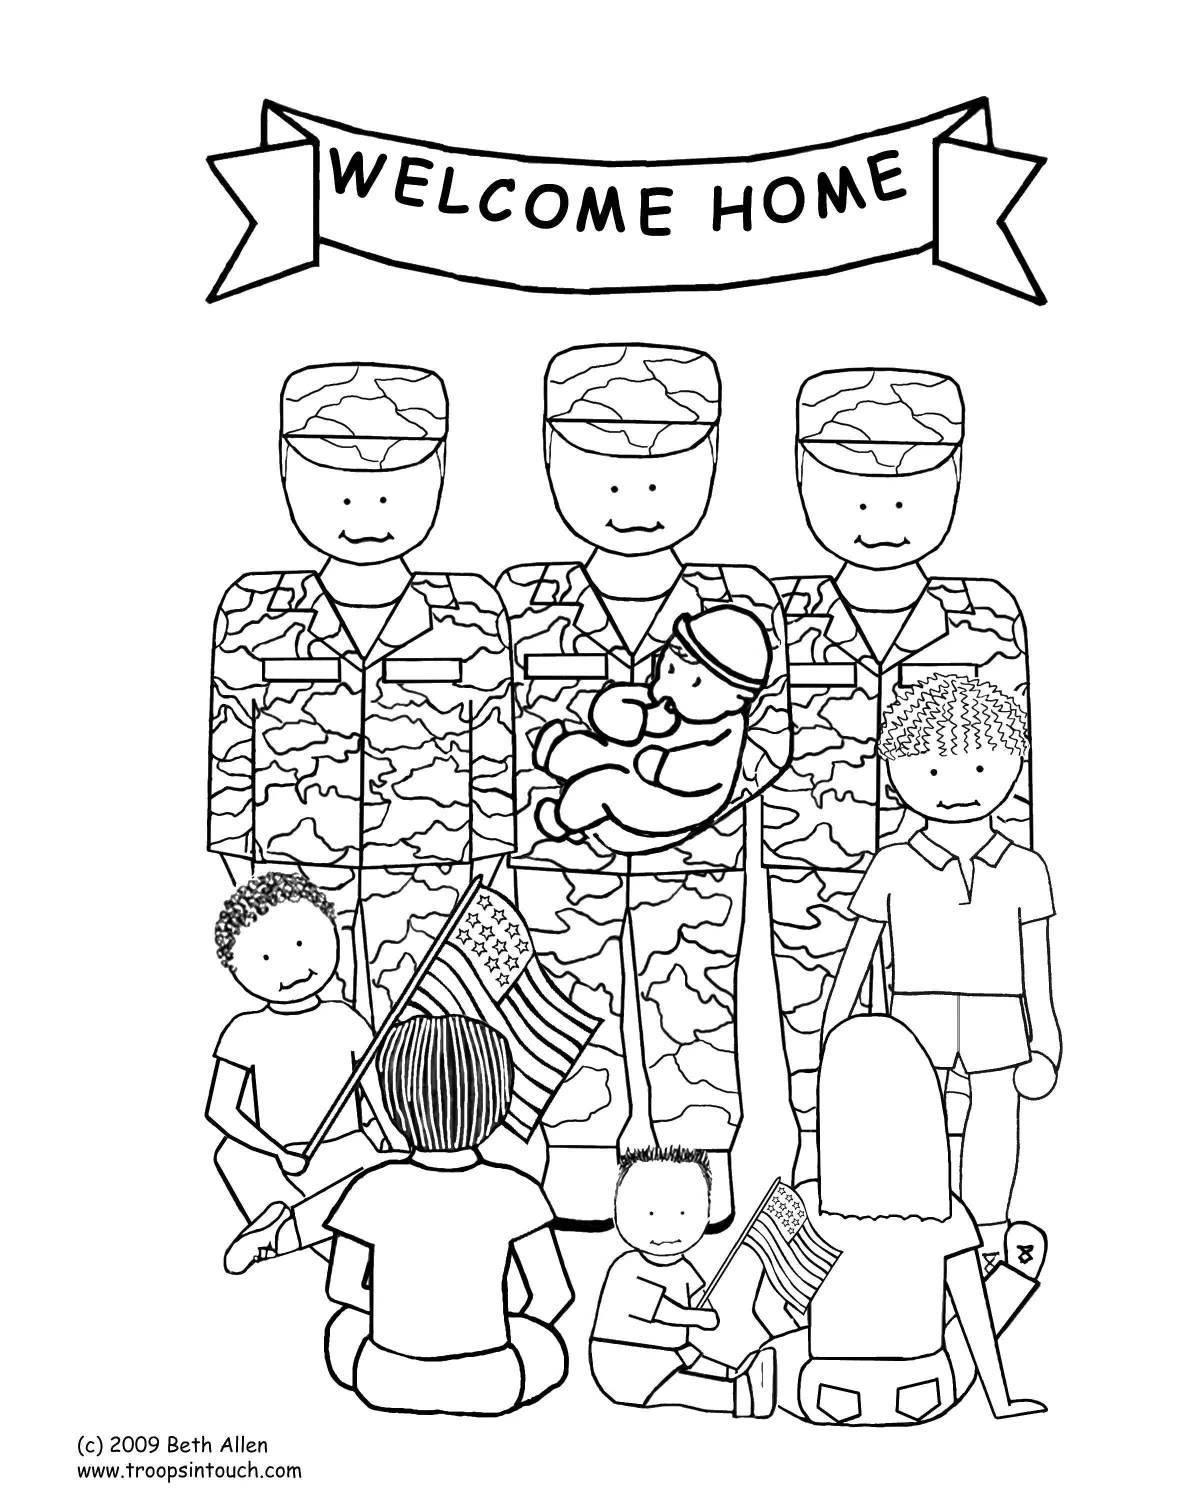 Joyful soldier and child's drawing